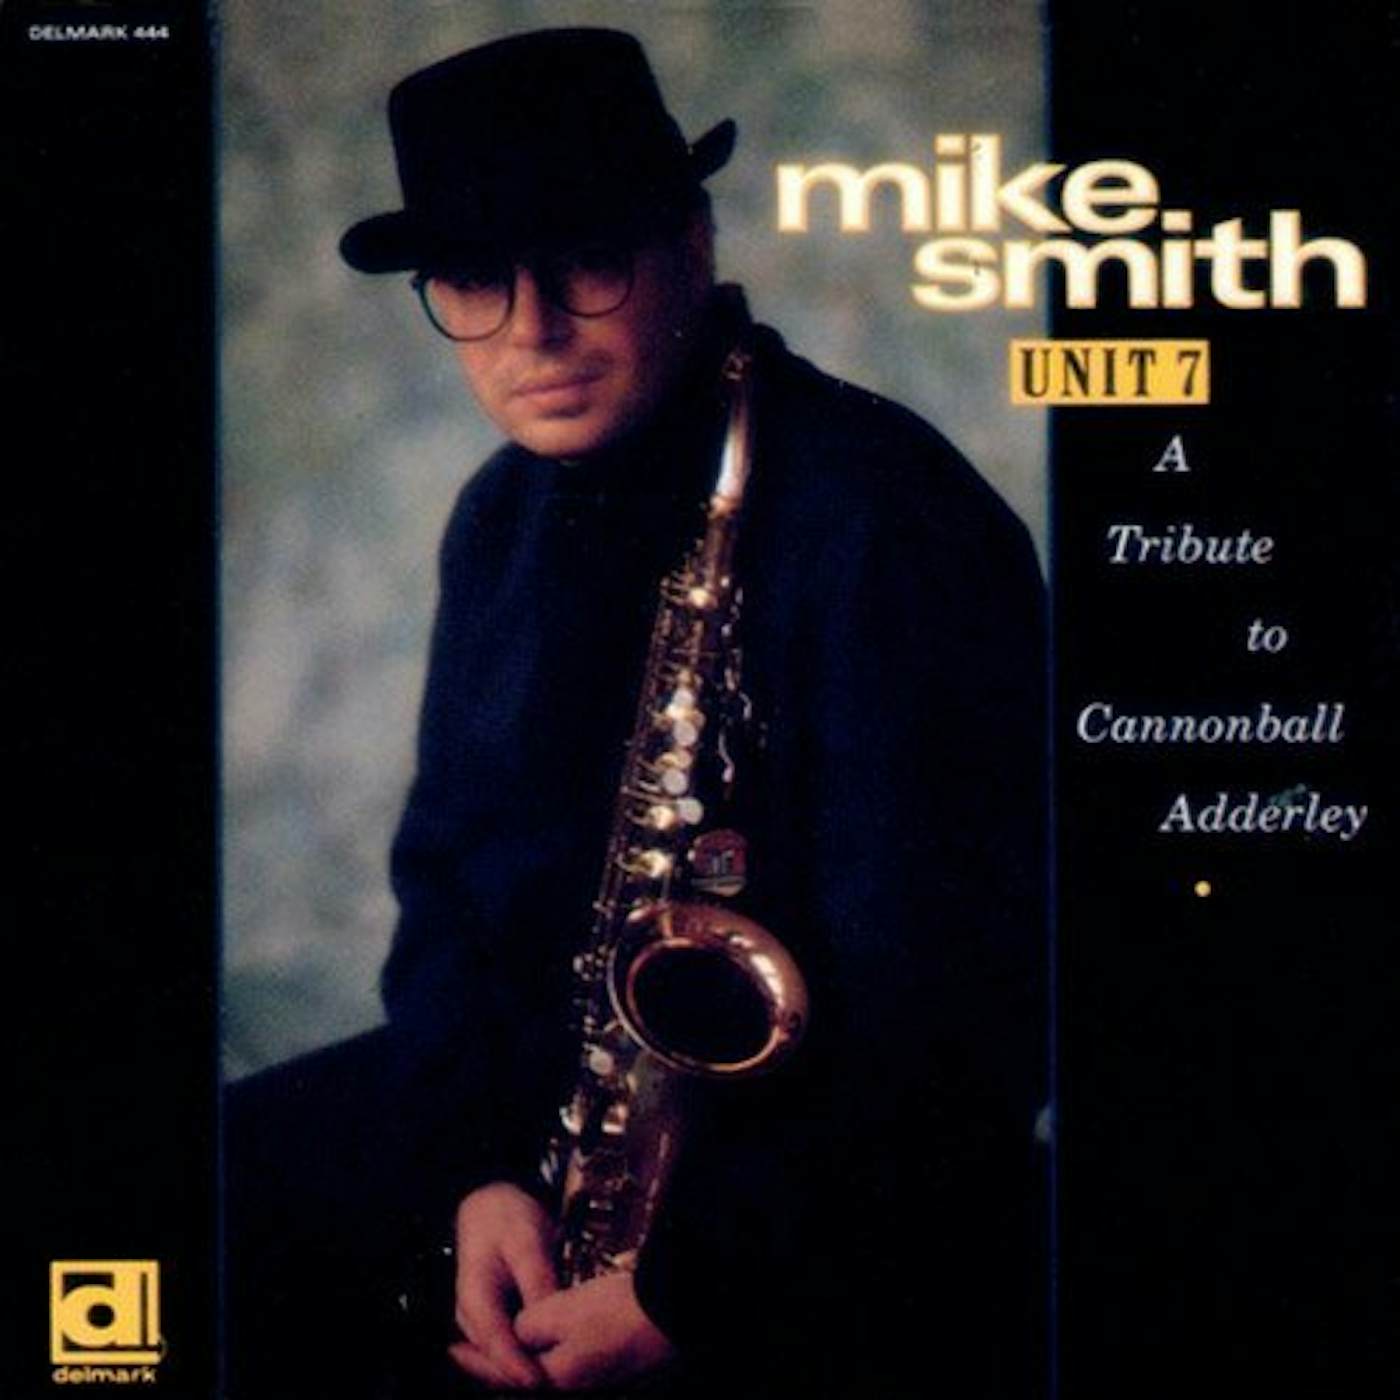 Mike Smith UNIT 7 CD